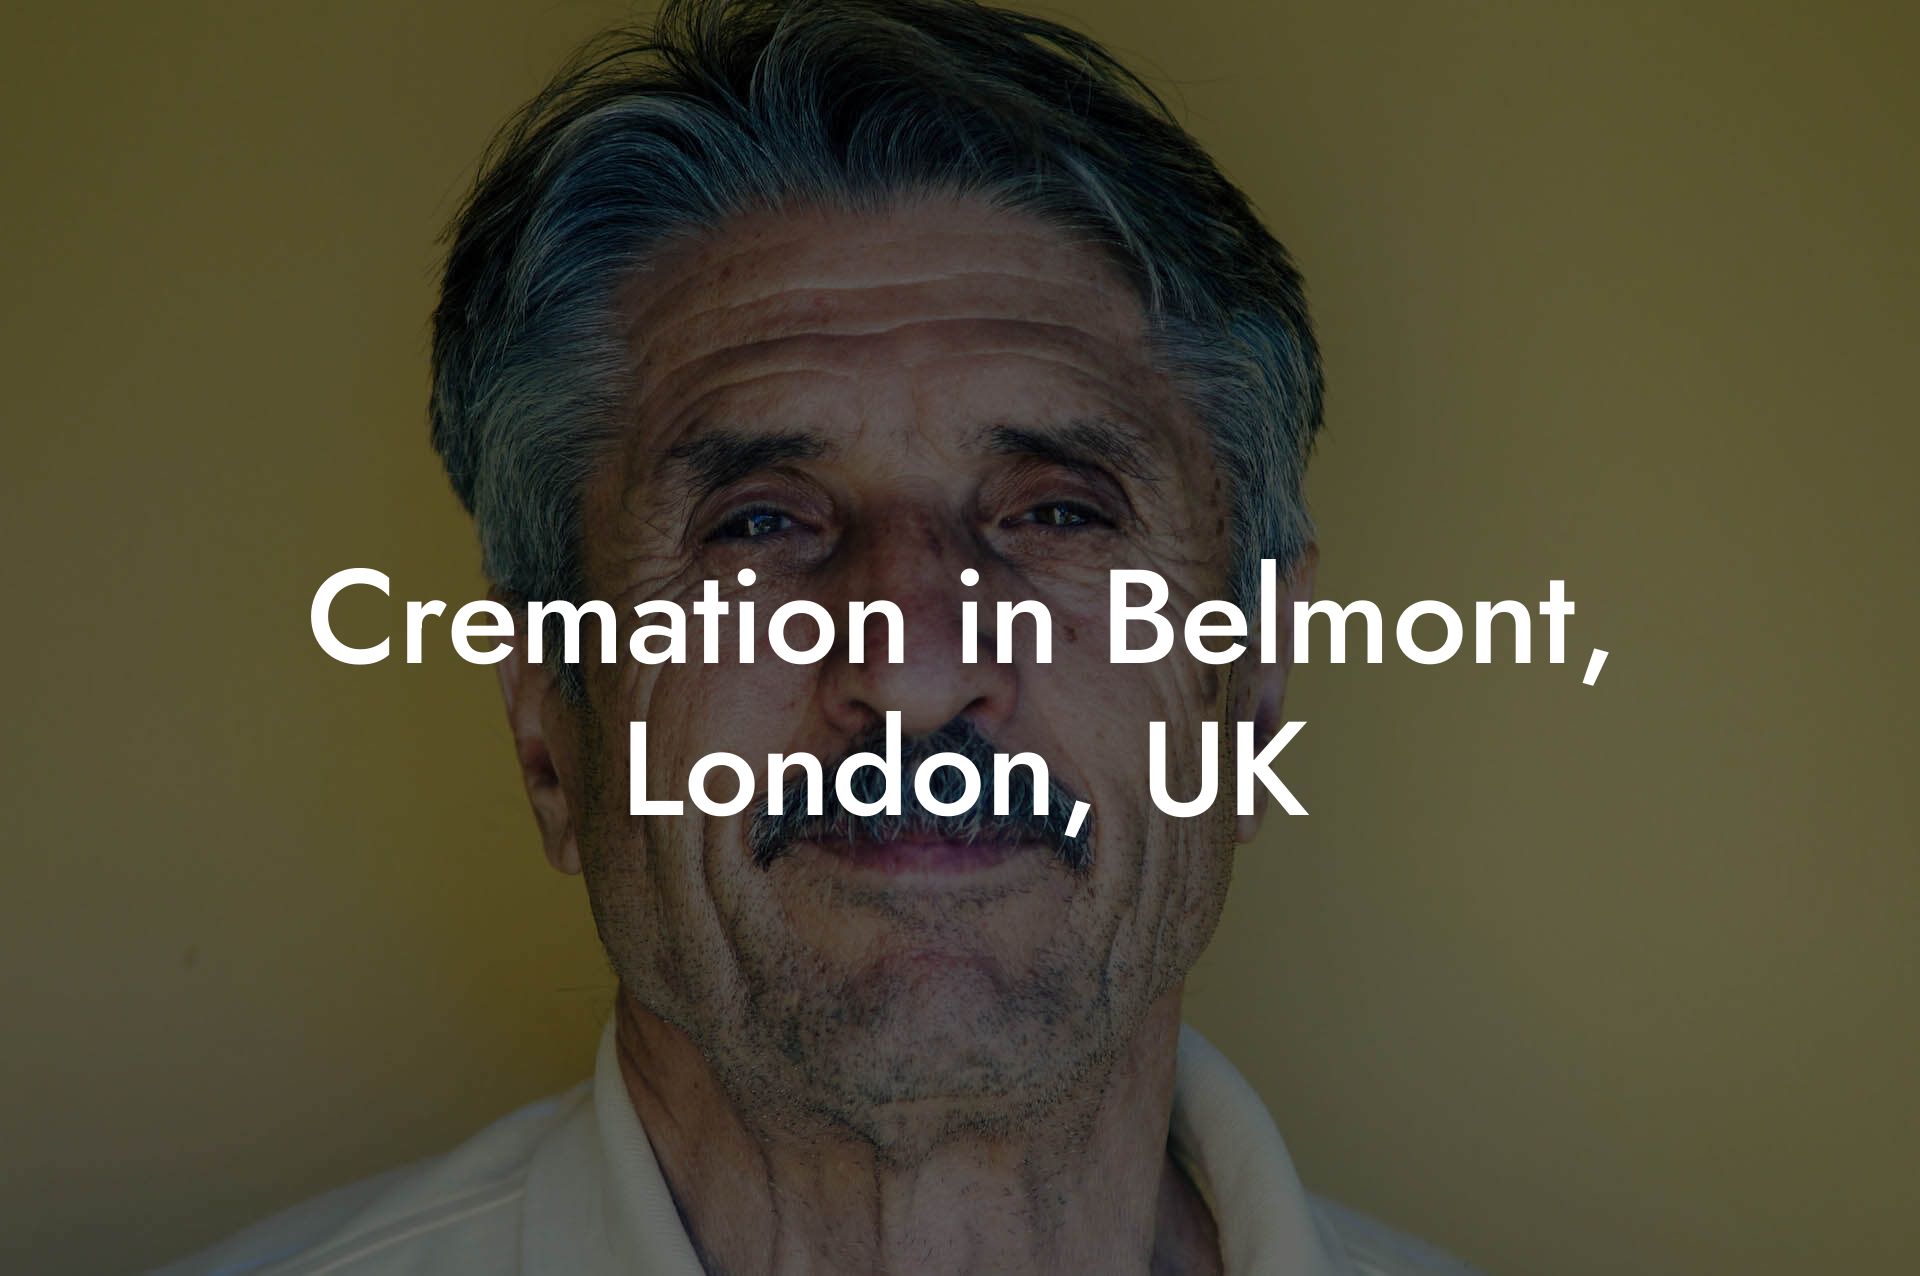 Cremation in Belmont, London, UK